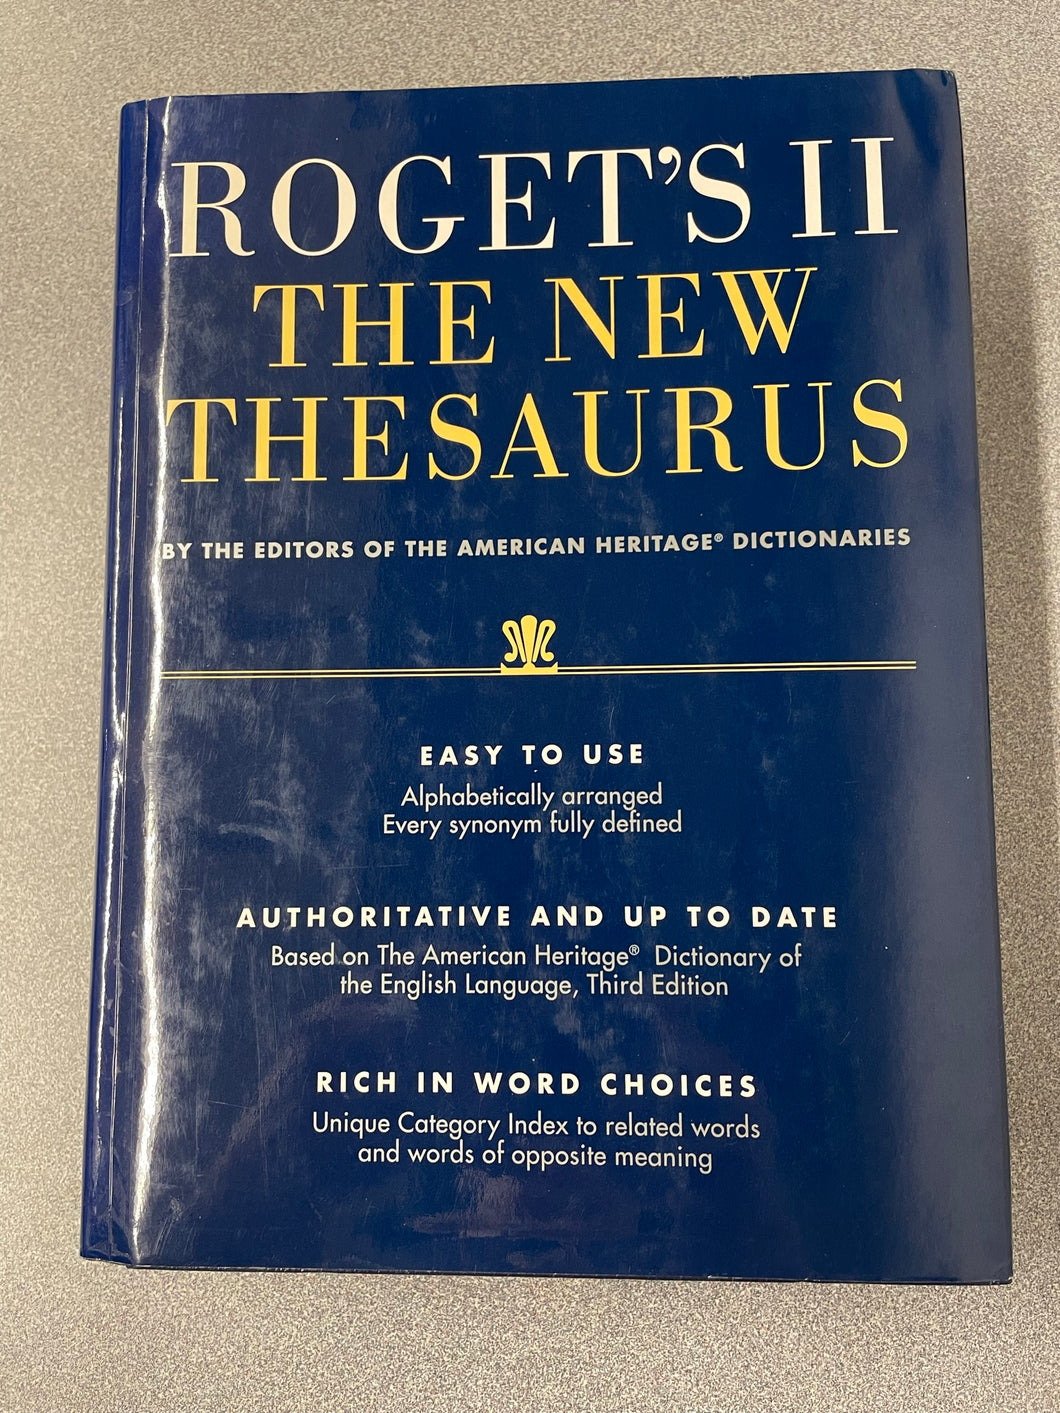 Roget's II: The New Thesaurus: By the Editors of the American Heritage Dictionaries, [1995] REF 6/23